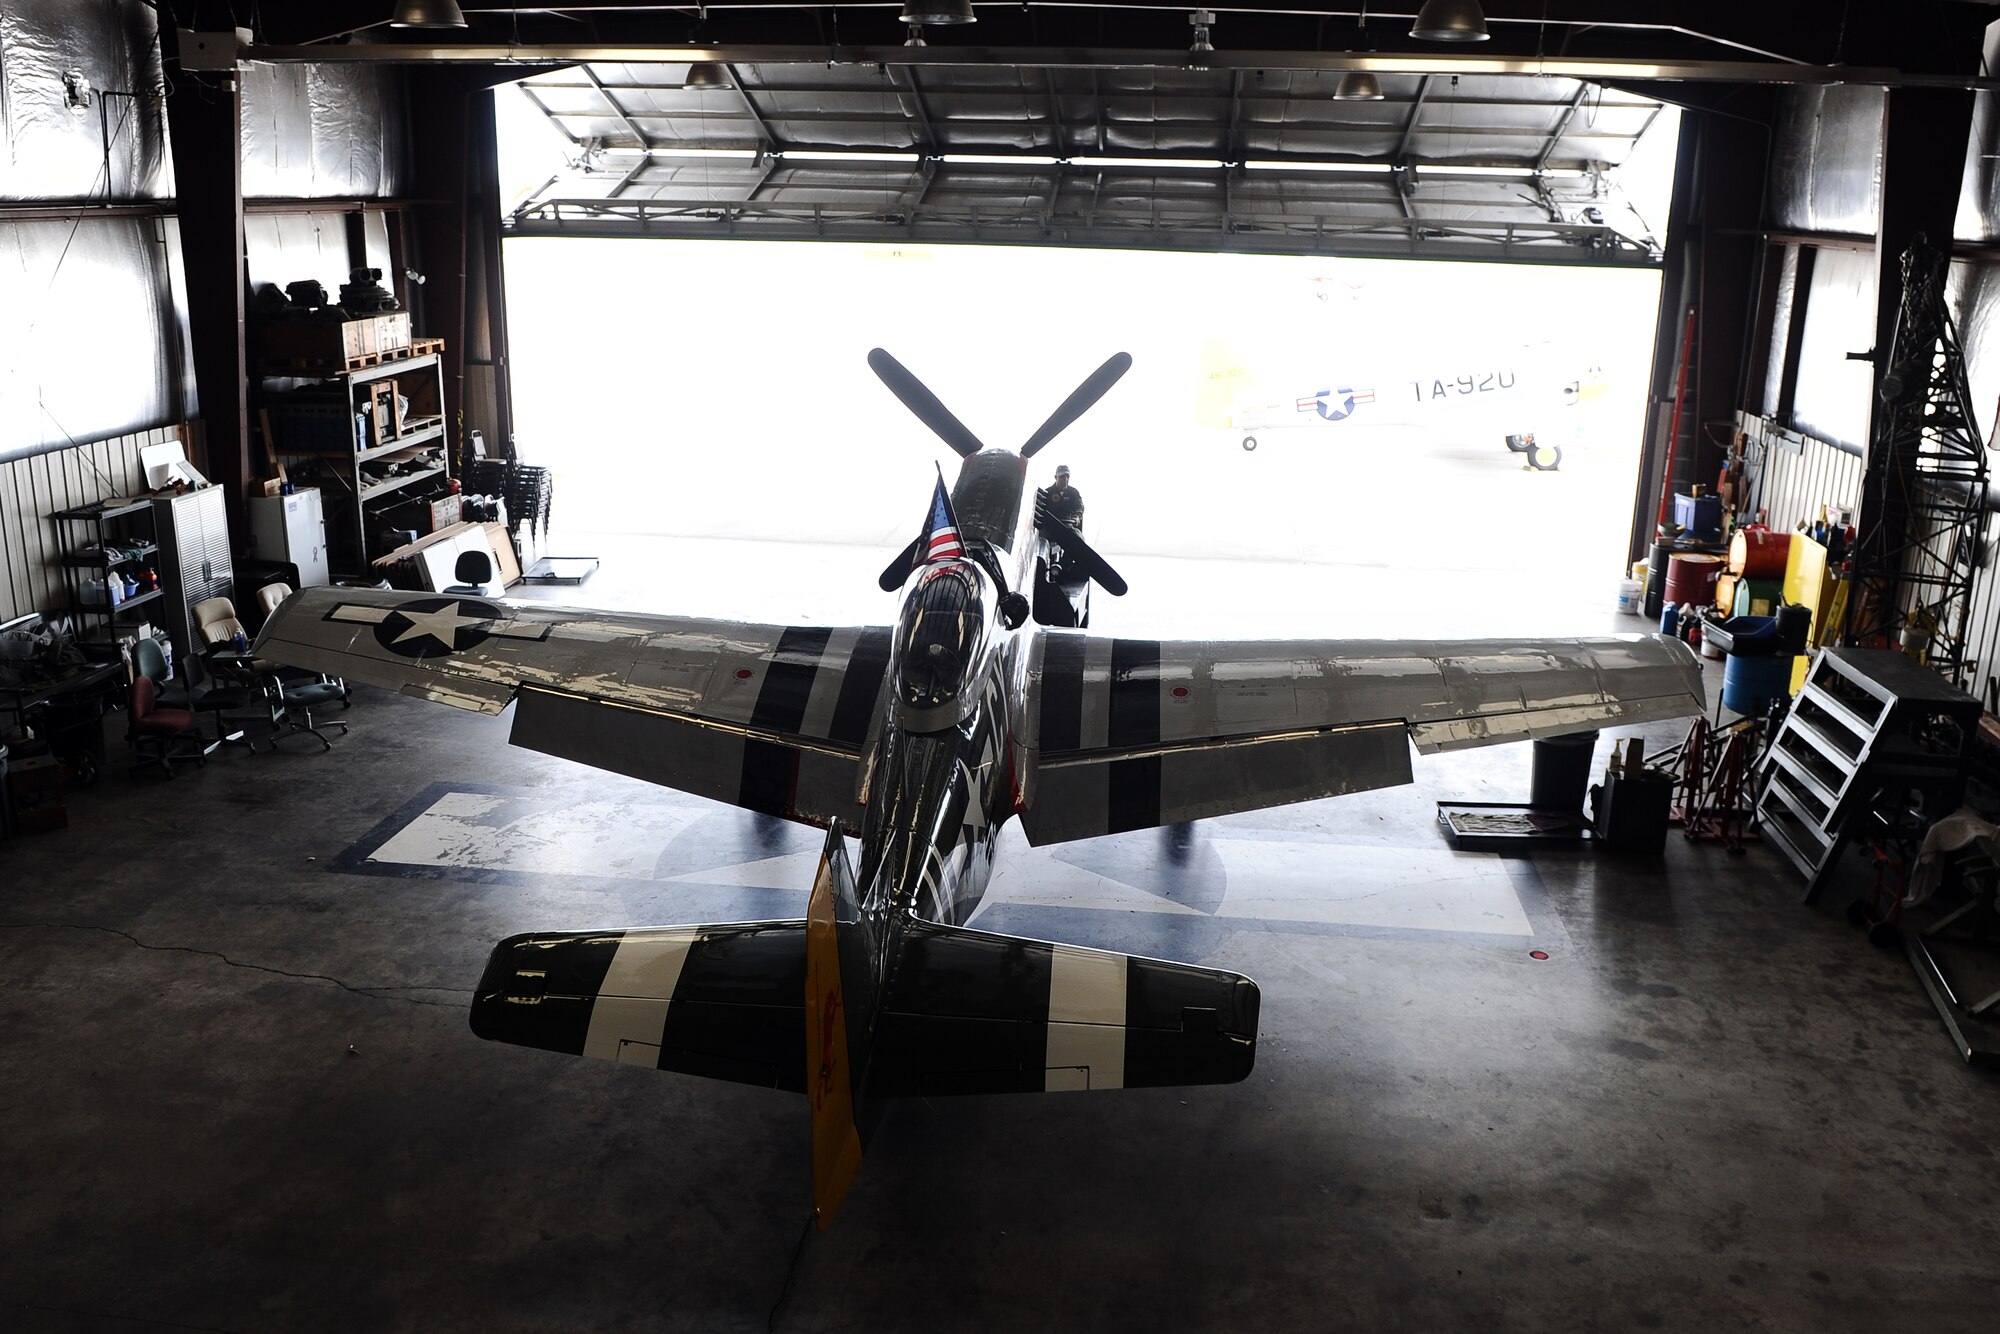 The P-51 Mustang Gunfighter sits inside the Commemorative Air Force hangar at the Council Bluffs Municipal Airport, Iowa, on June 27. The P-51 has been a marquee act at several air shows around the country for decades.  (U.S. Air Force photo by Josh Plueger/Released)